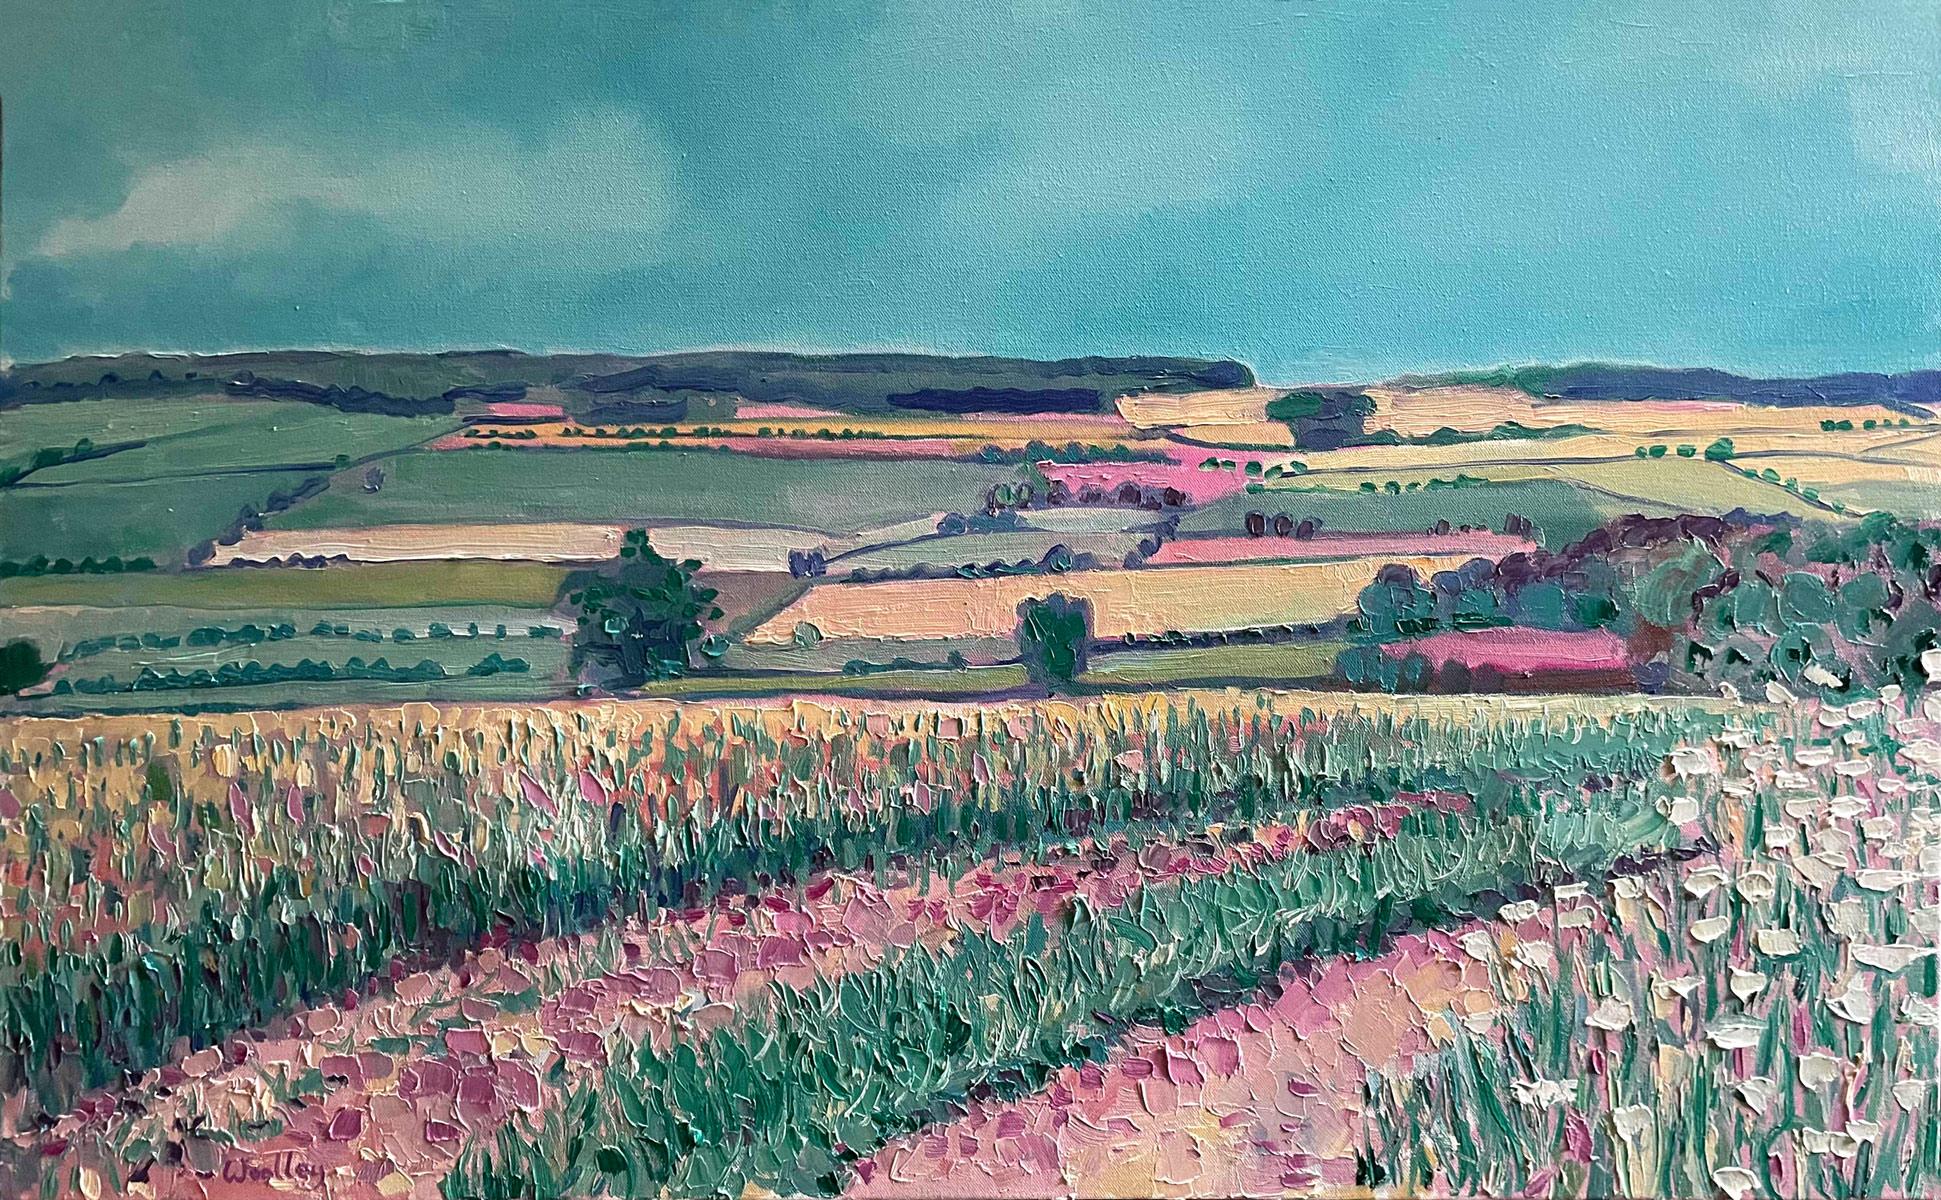 Eleanor Woolley  Landscape Painting - Chadlington, Oxfordshire, Original Contemporary Oil Painting, Oil on canvas